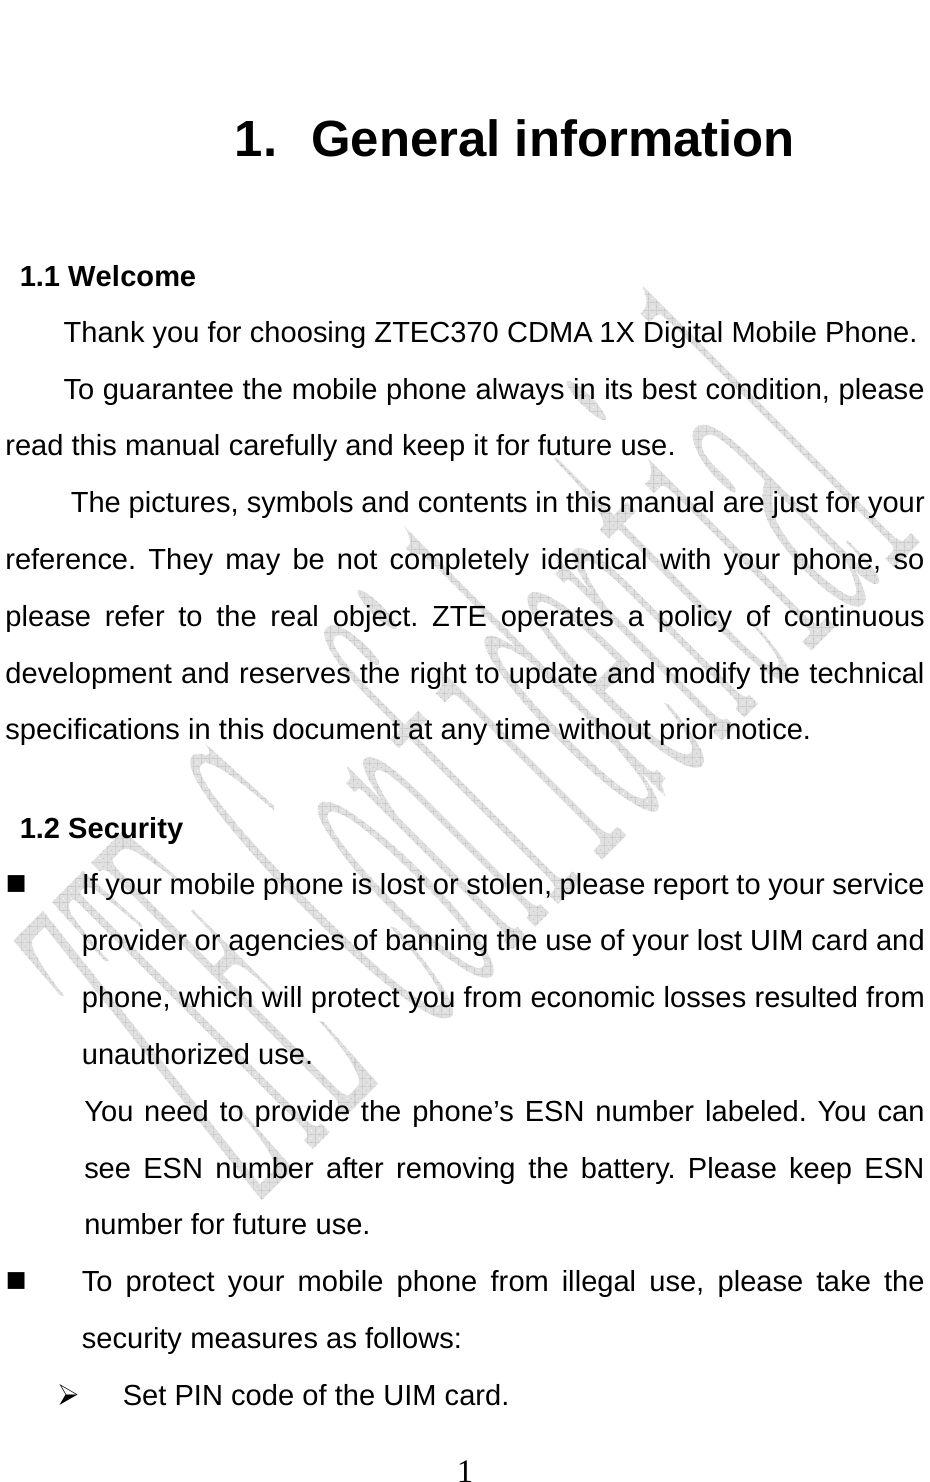                              11. General information 1.1 Welcome Thank you for choosing ZTEC370 CDMA 1X Digital Mobile Phone.   To guarantee the mobile phone always in its best condition, please read this manual carefully and keep it for future use. The pictures, symbols and contents in this manual are just for your reference. They may be not completely identical with your phone, so please refer to the real object. ZTE operates a policy of continuous development and reserves the right to update and modify the technical specifications in this document at any time without prior notice. 1.2 Security   If your mobile phone is lost or stolen, please report to your service provider or agencies of banning the use of your lost UIM card and phone, which will protect you from economic losses resulted from unauthorized use. You need to provide the phone’s ESN number labeled. You can see ESN number after removing the battery. Please keep ESN number for future use.     To protect your mobile phone from illegal use, please take the security measures as follows: ¾  Set PIN code of the UIM card. 